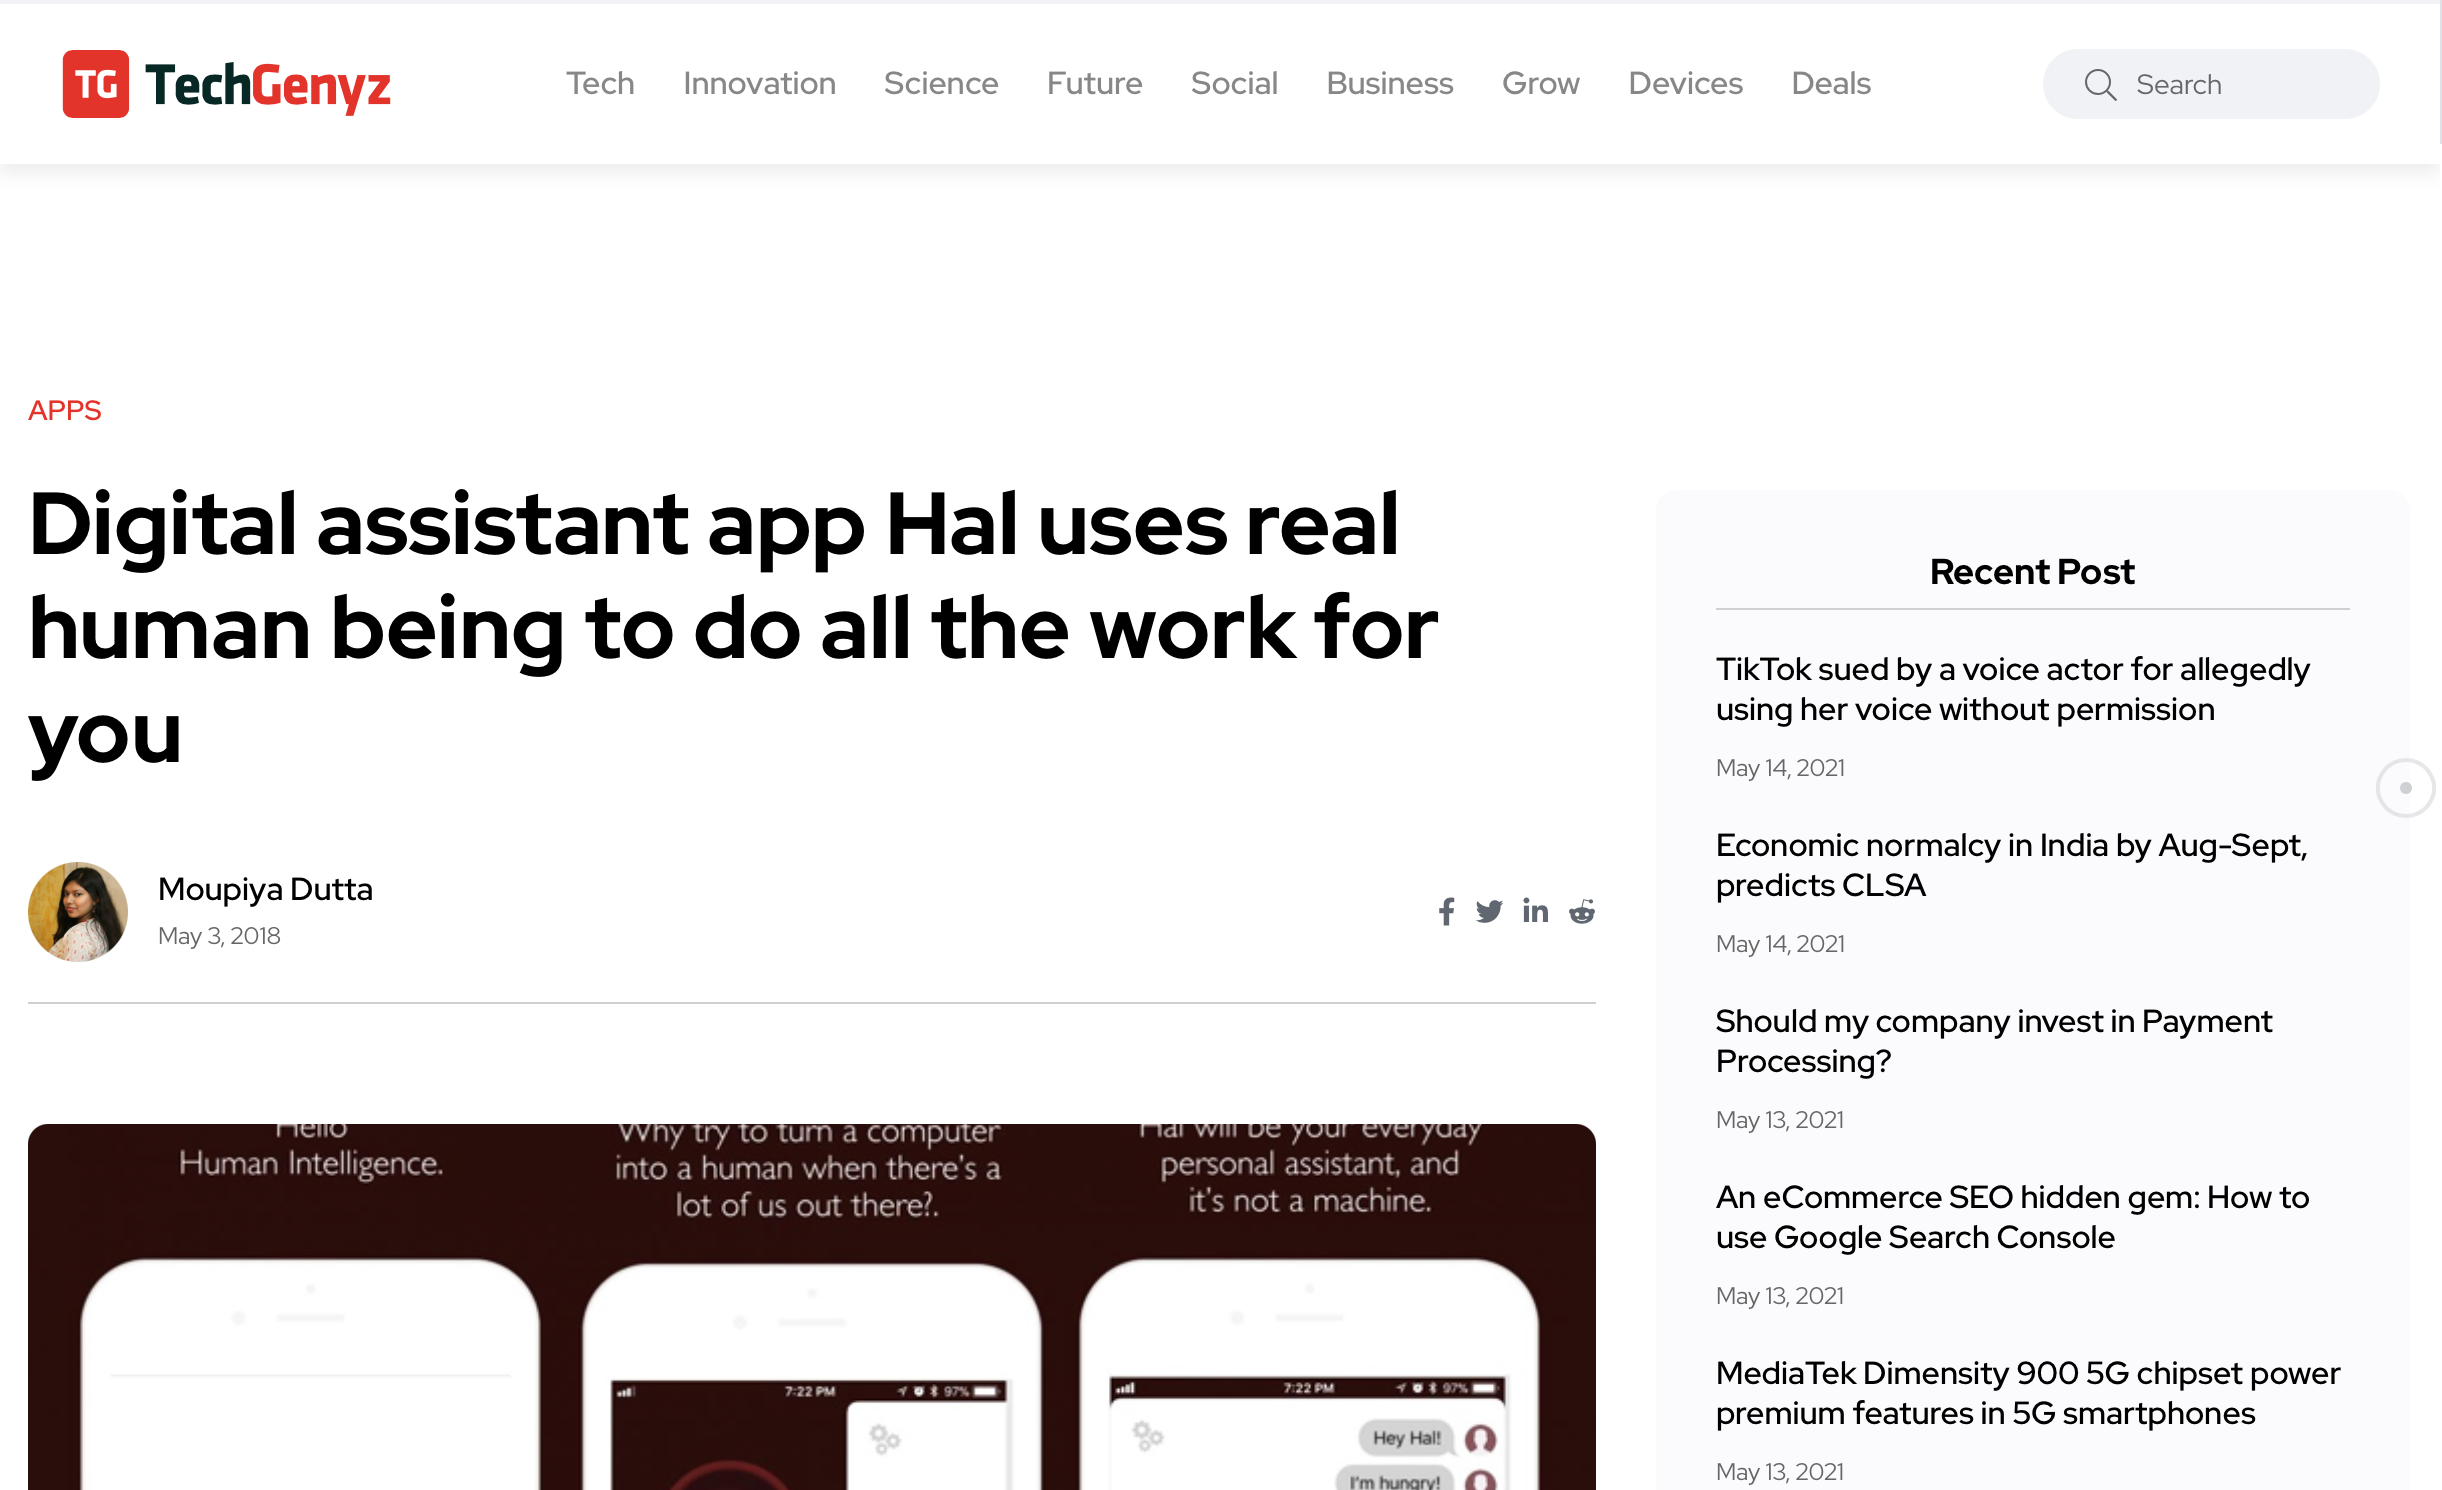 “Digital assistant app Hal uses real human being to do all the work for you”